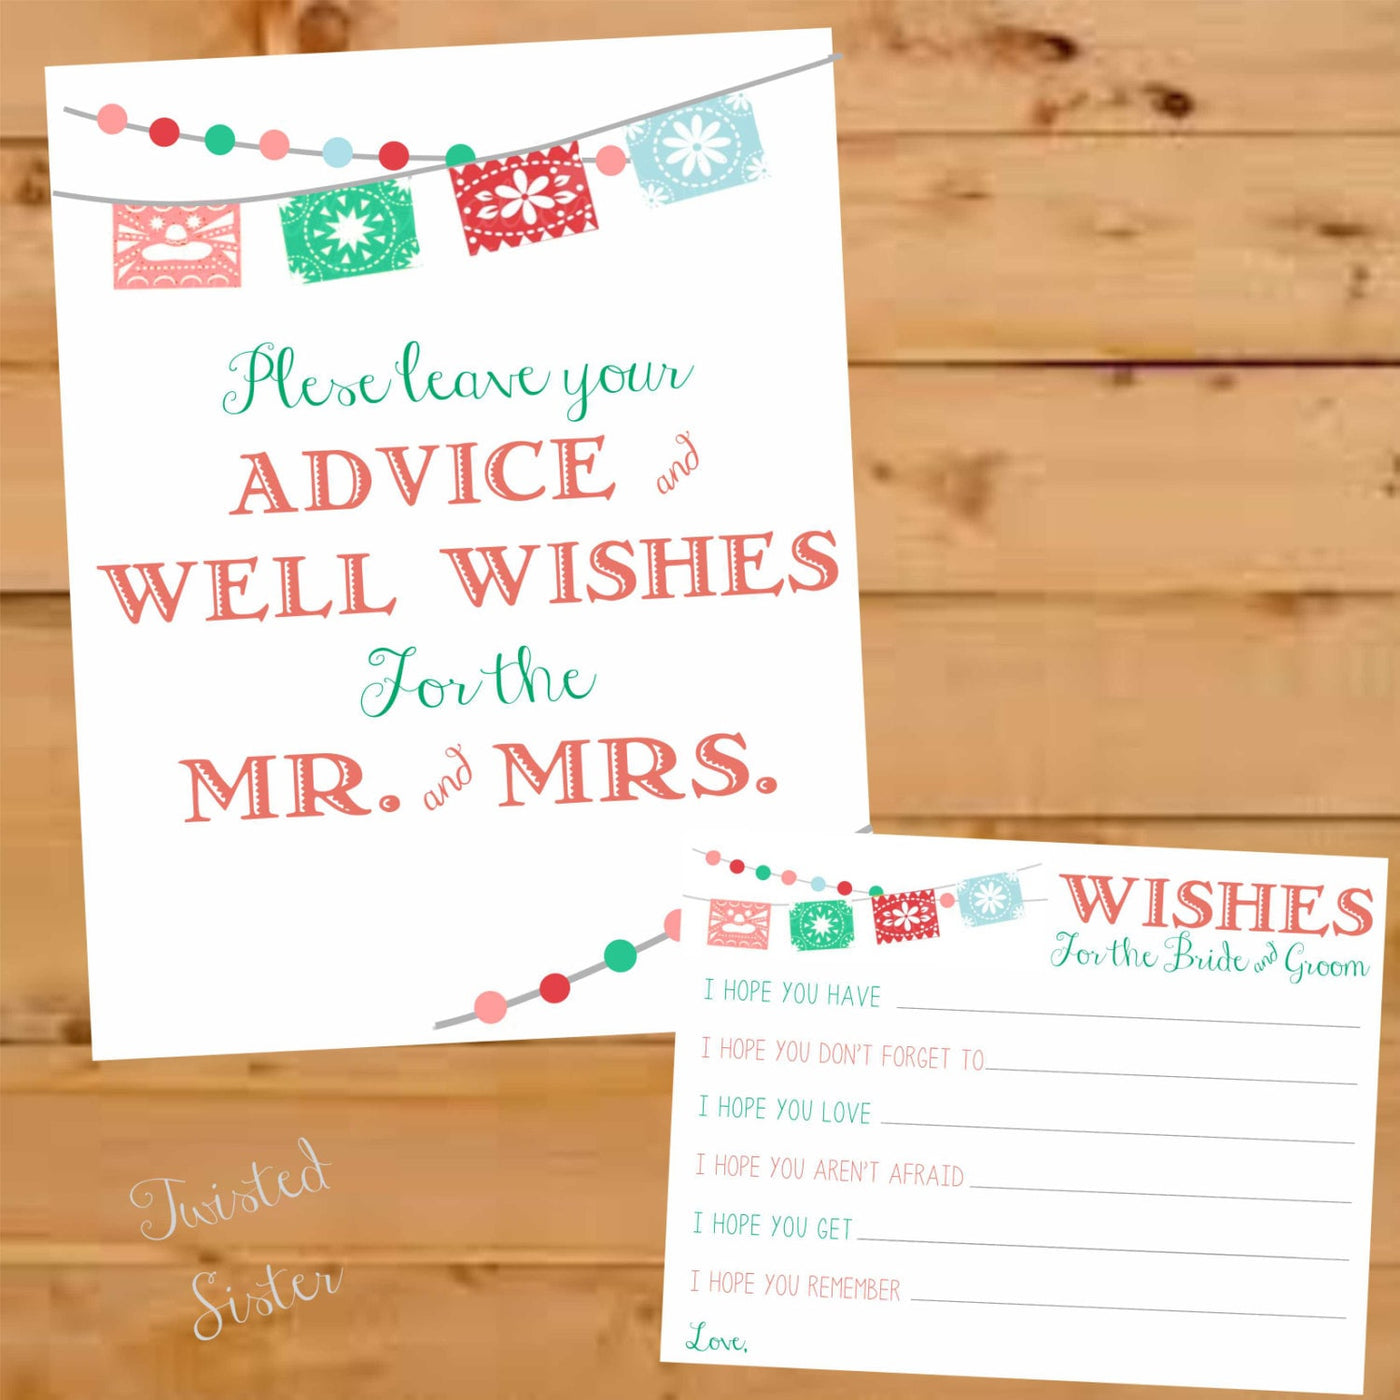 Mexican Bridal Shower Decor, Fiesta Bridal Shower Decor, Advice for the Bride and Groom, Wedding Advice Cards, Advice for the Bride to Be